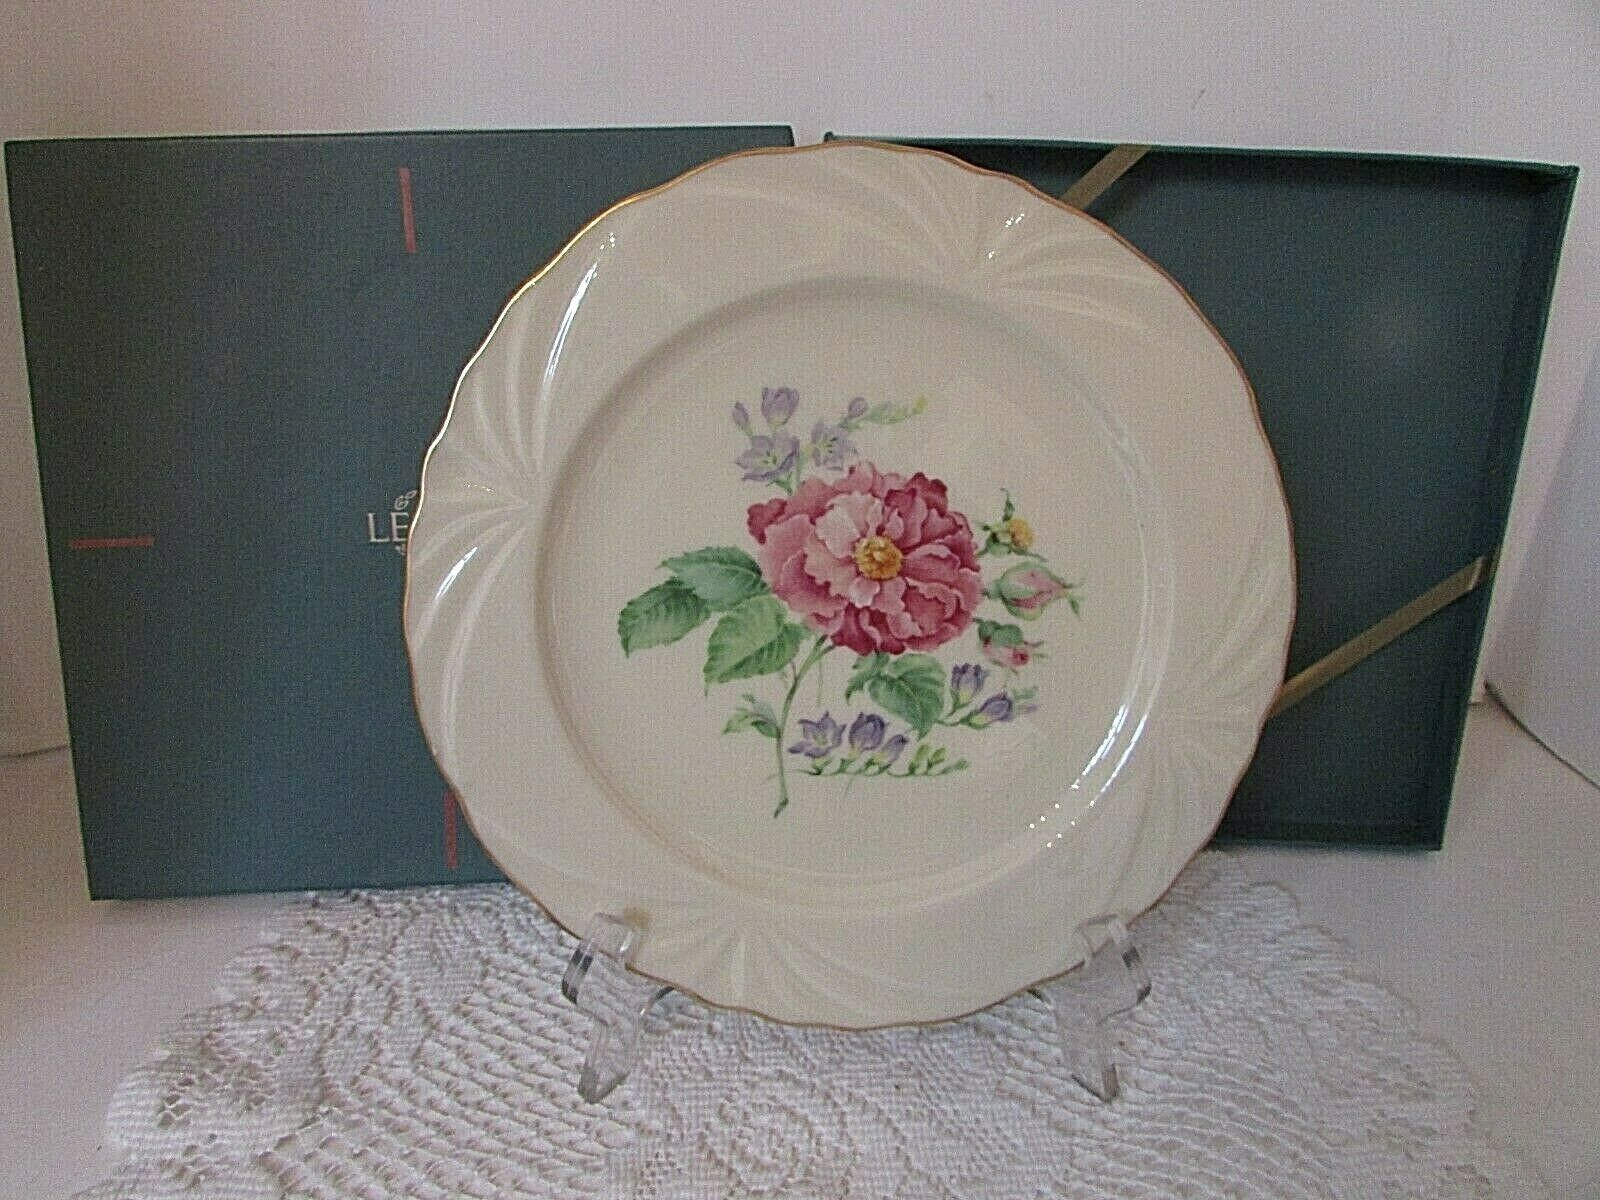 LENOX CHINA PLATE ROSE EXPRESSIONS COLLECTION DARK PINK & FREESIA 8.75" BOXED - $12.82